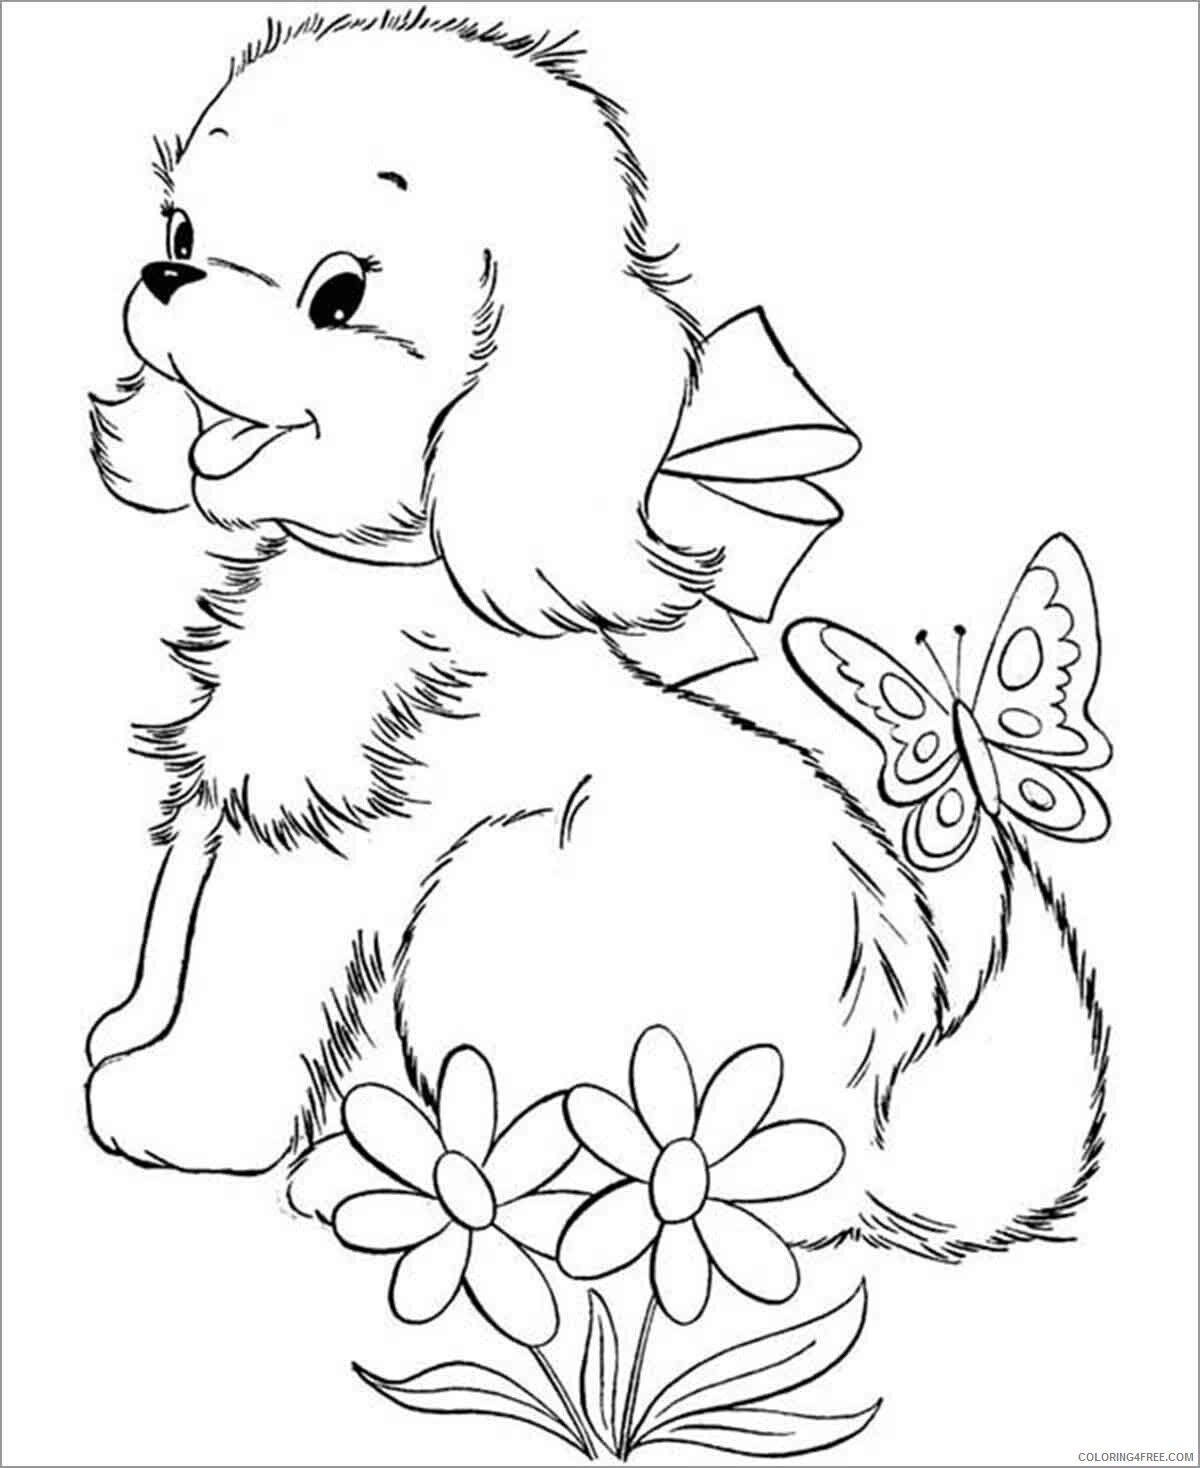 Butterfly Coloring Pages Animal Printable Sheets Dog and Butterfly 2021 0702 Coloring4free